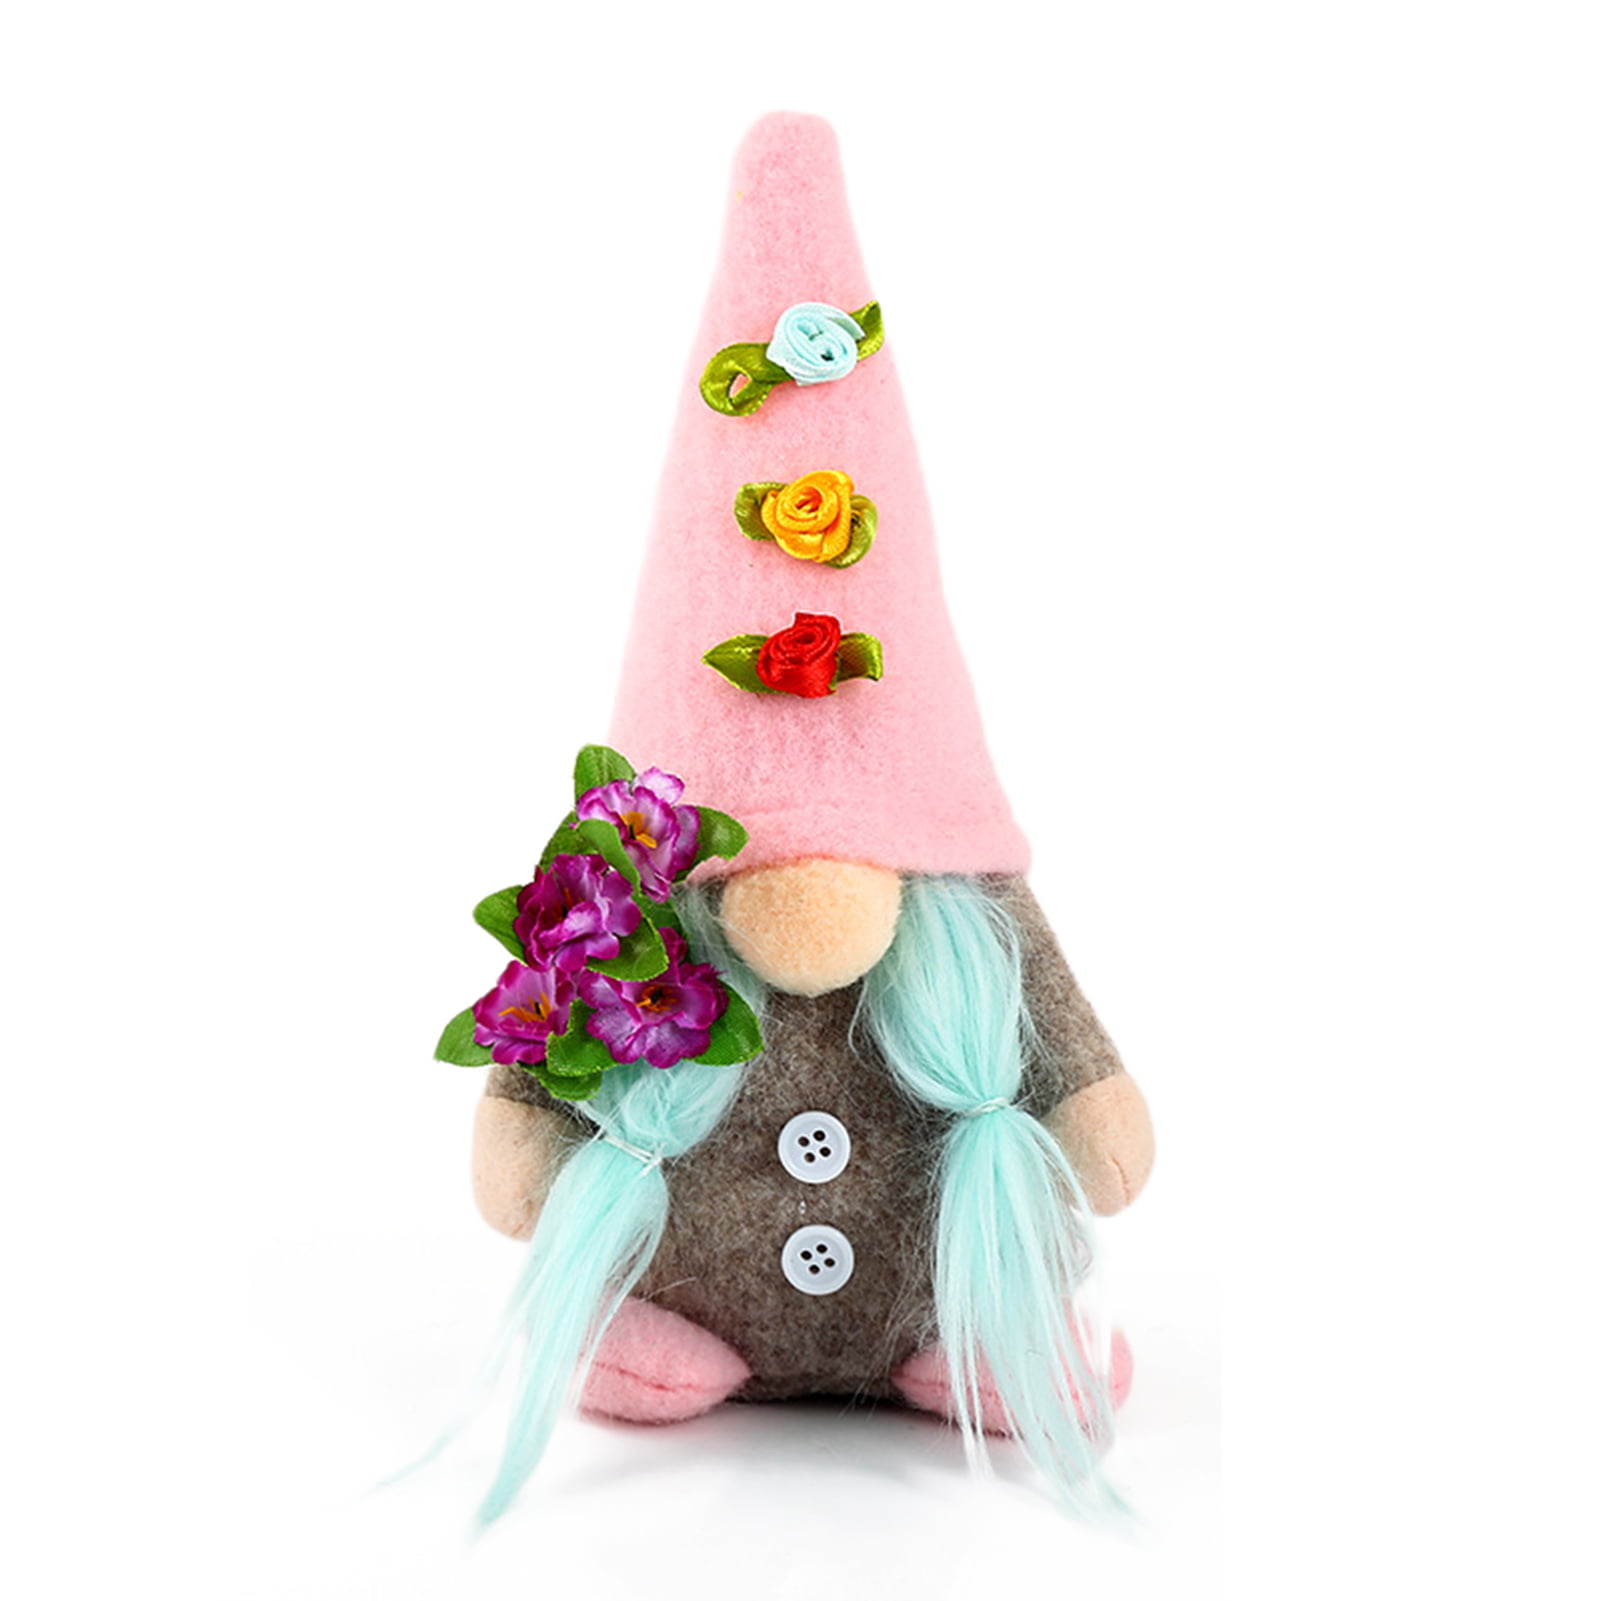 Details about   2x Swedish Gnome Plush Doll Faceless Toys Kids Gift Household Ornaments 